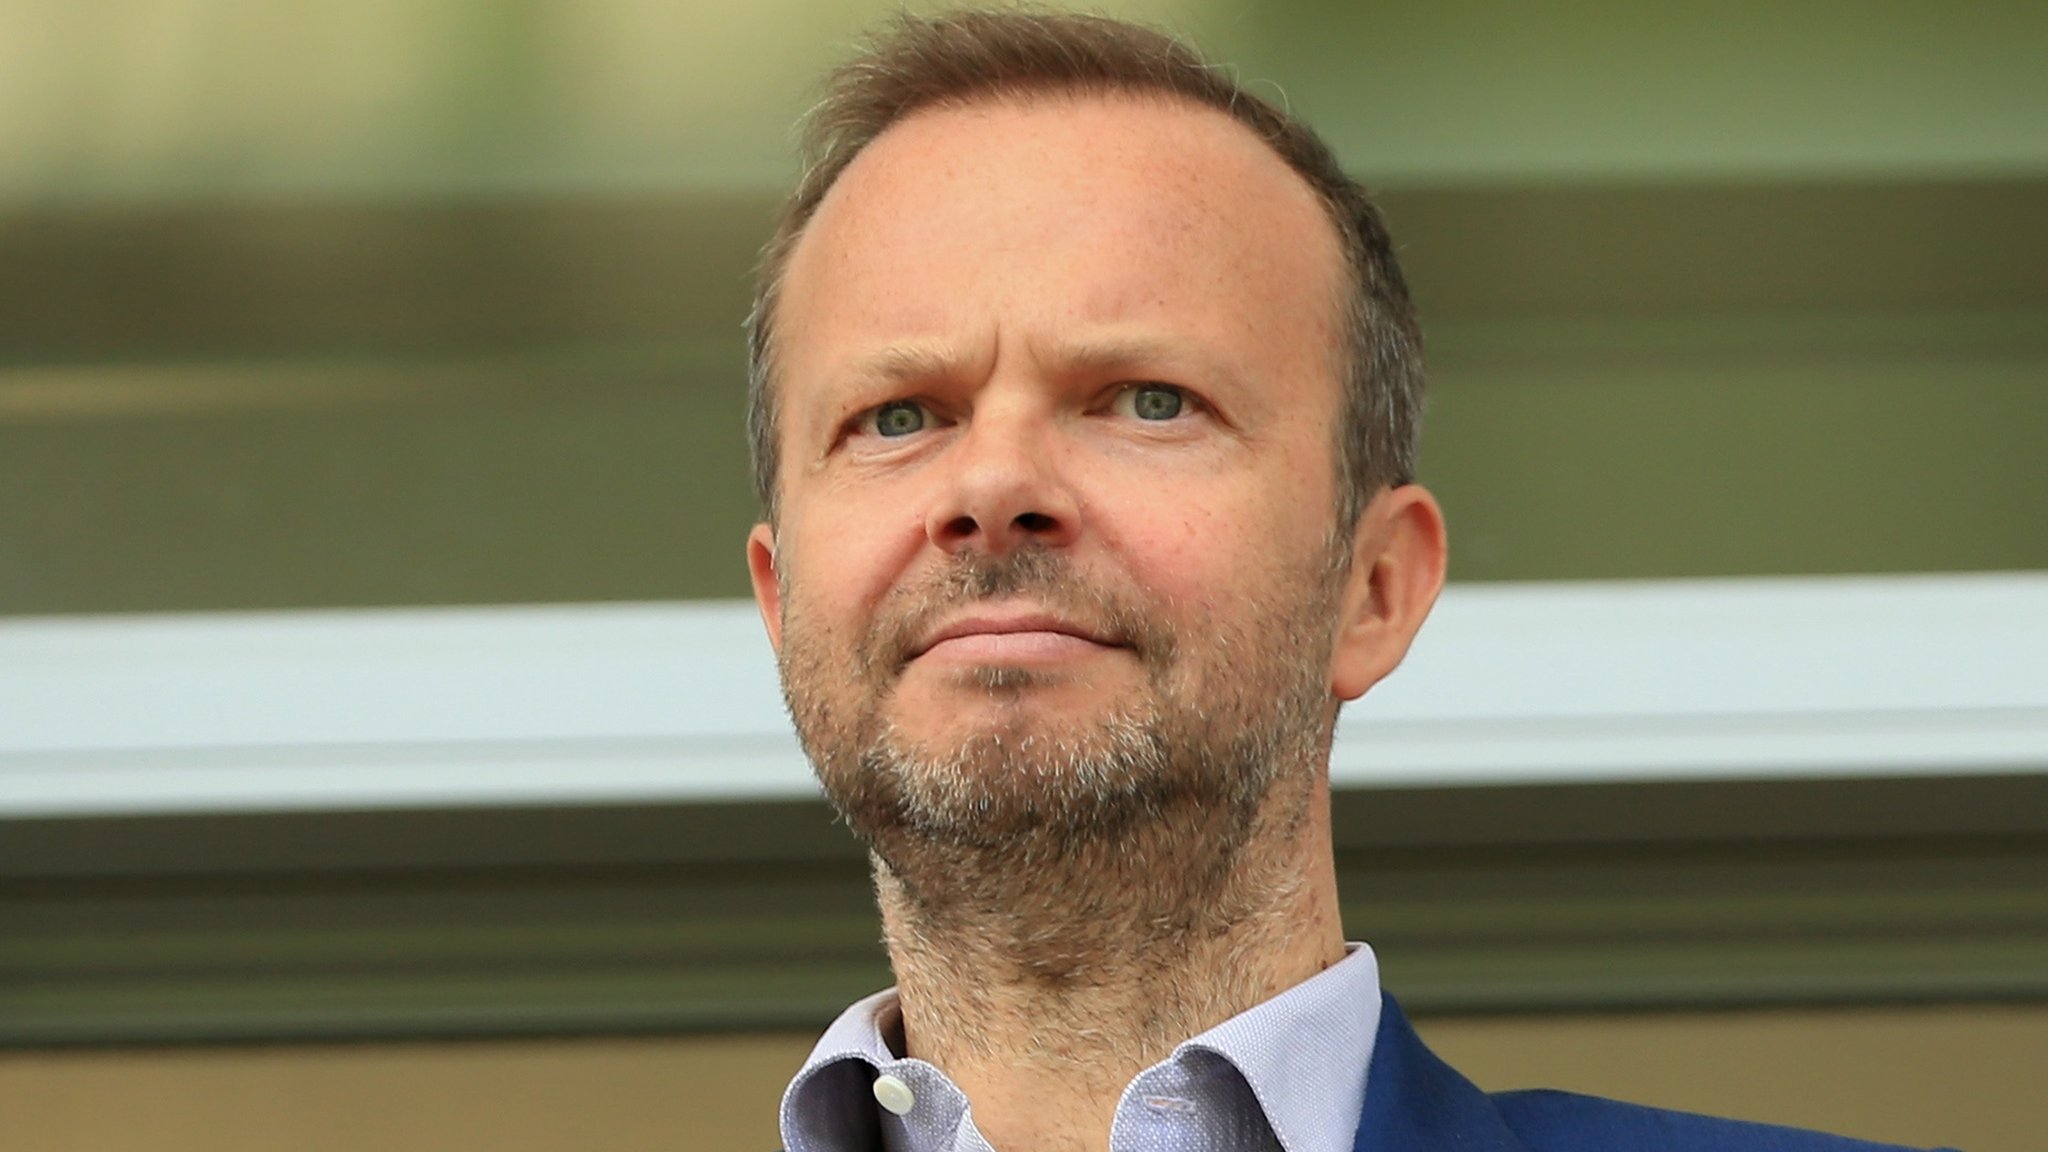 Man Utd fans pay for banner criticising Woodward to be flown over game